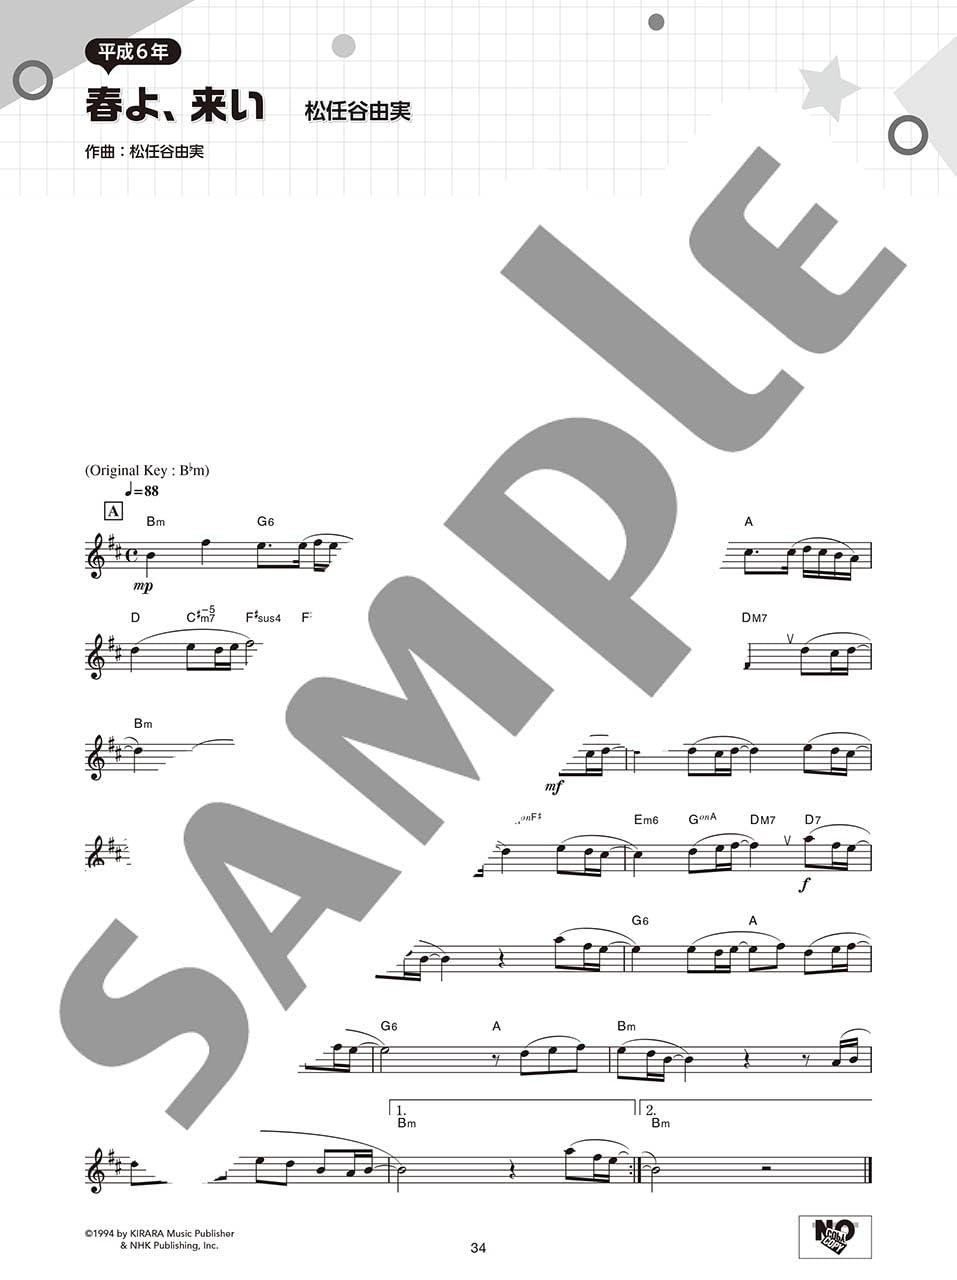 Japanese Hits from the Heisei Era(1981-2019) for Flute Solo Sheet Music Book